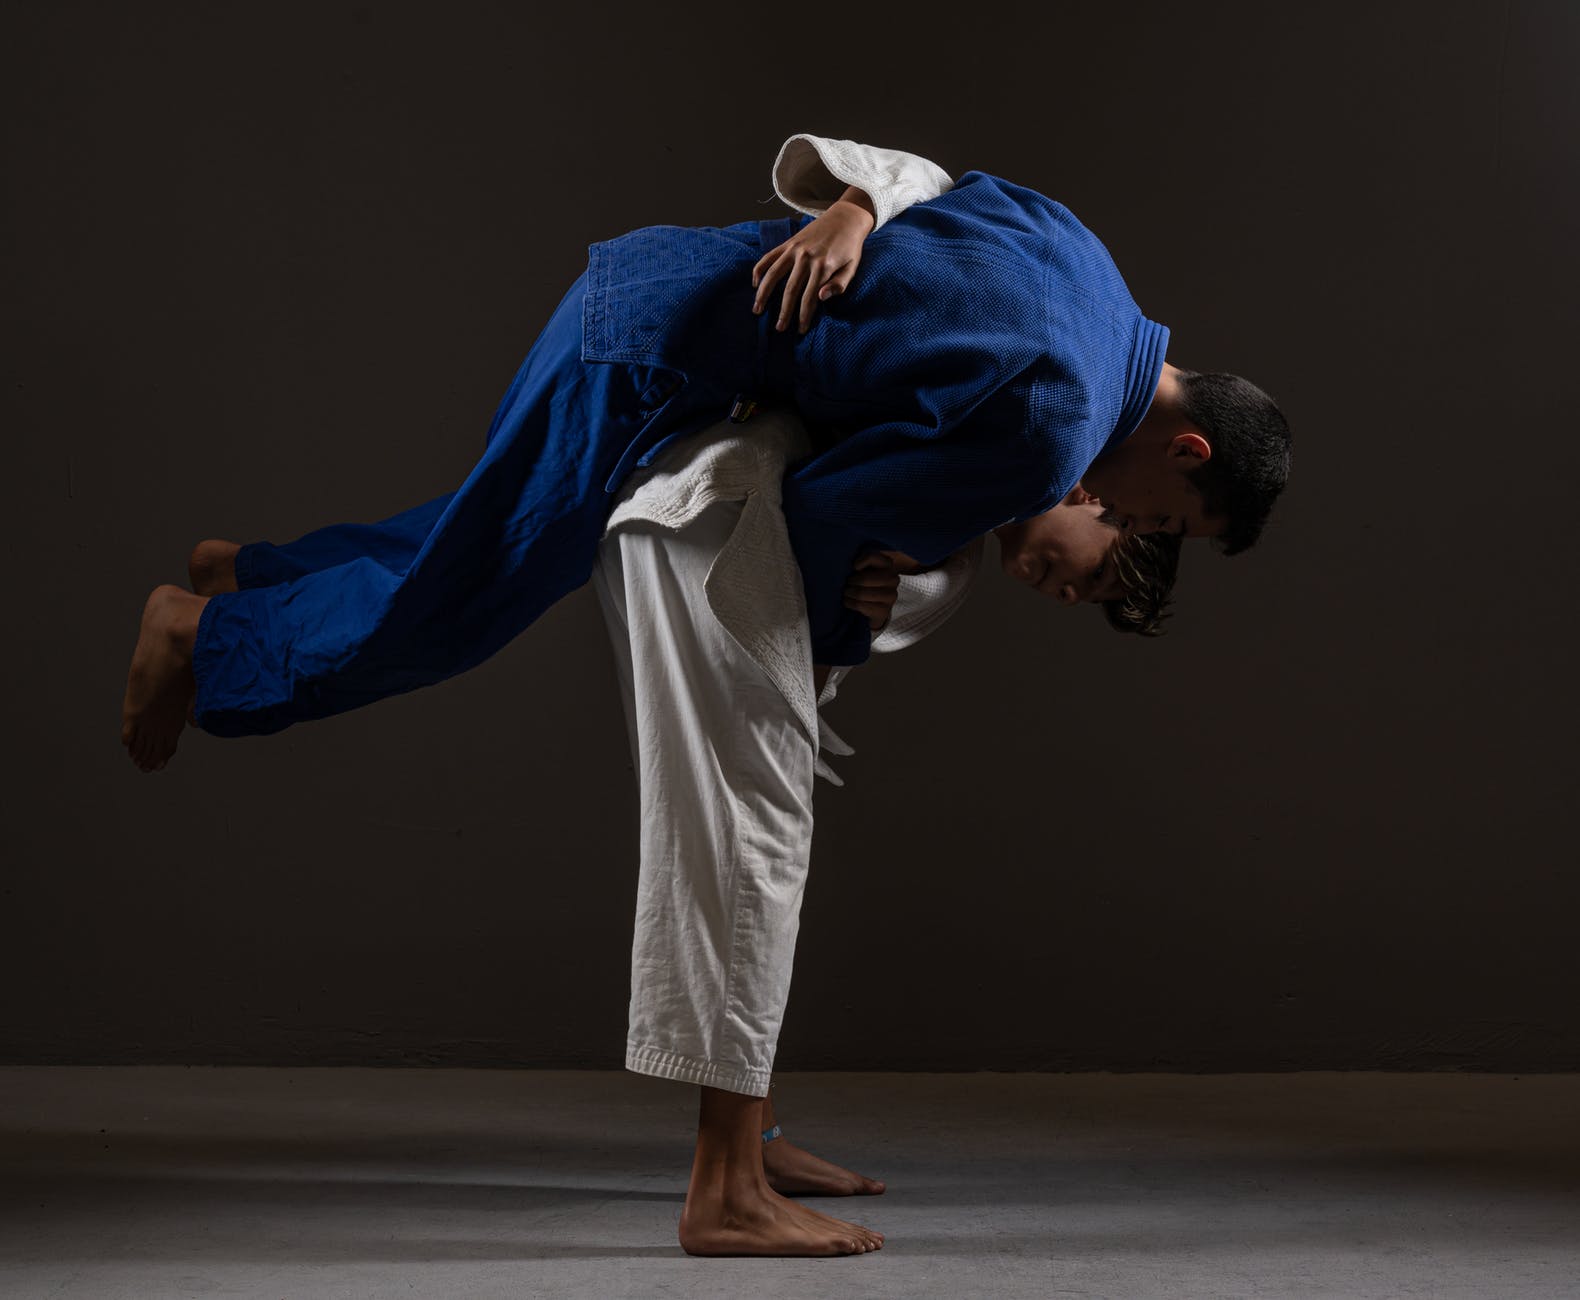 young ethnic judoists performing nage waza technique